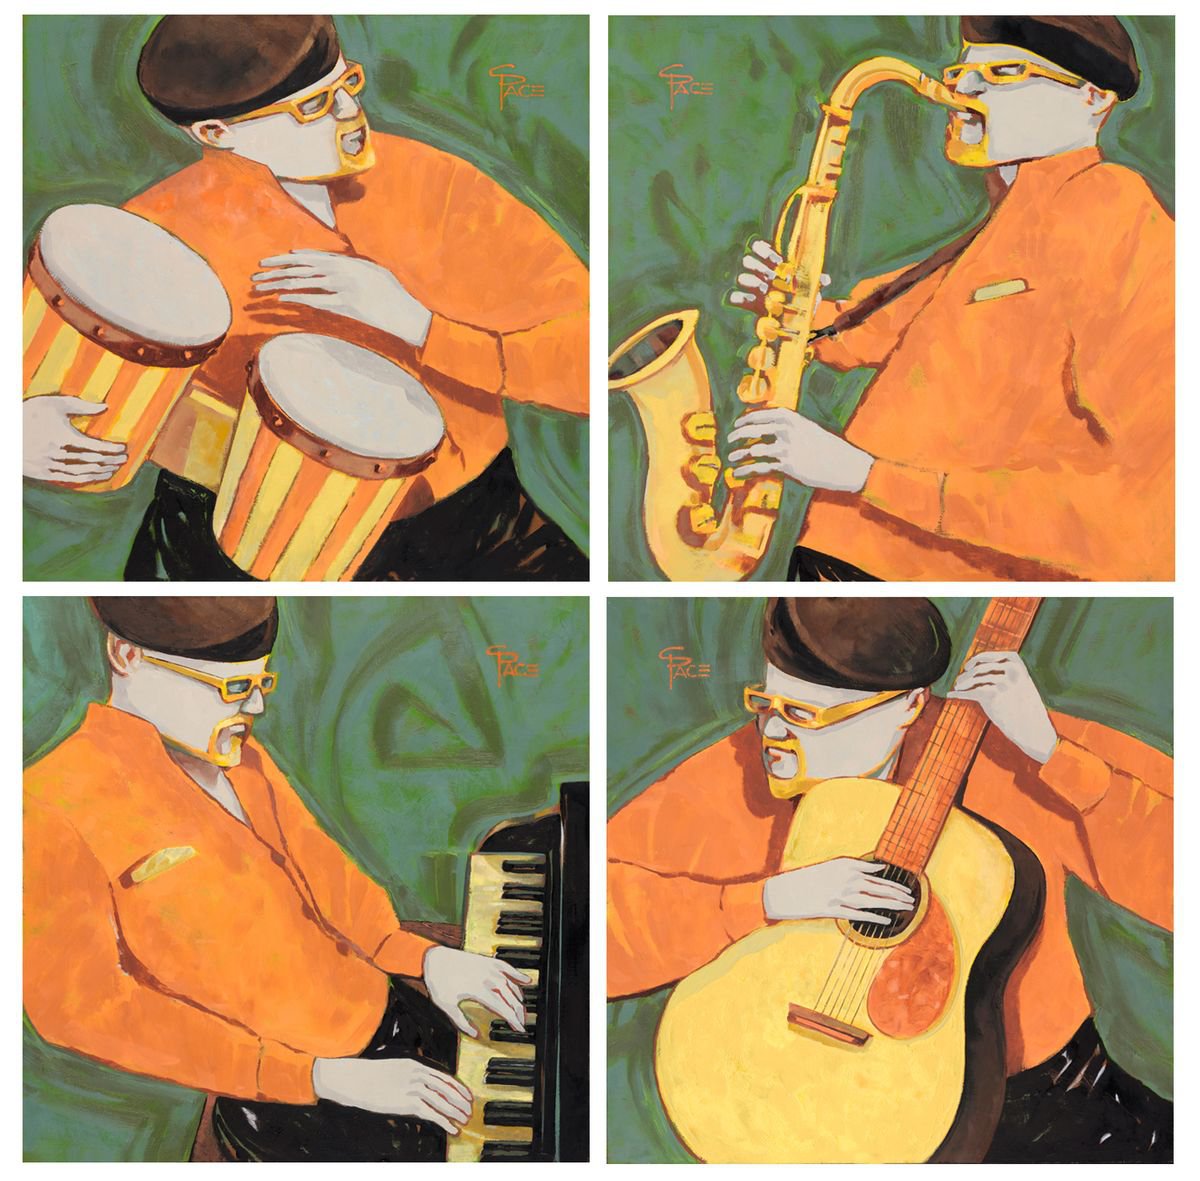 4 Hip Musicians - Quadriptych by Charles Pace